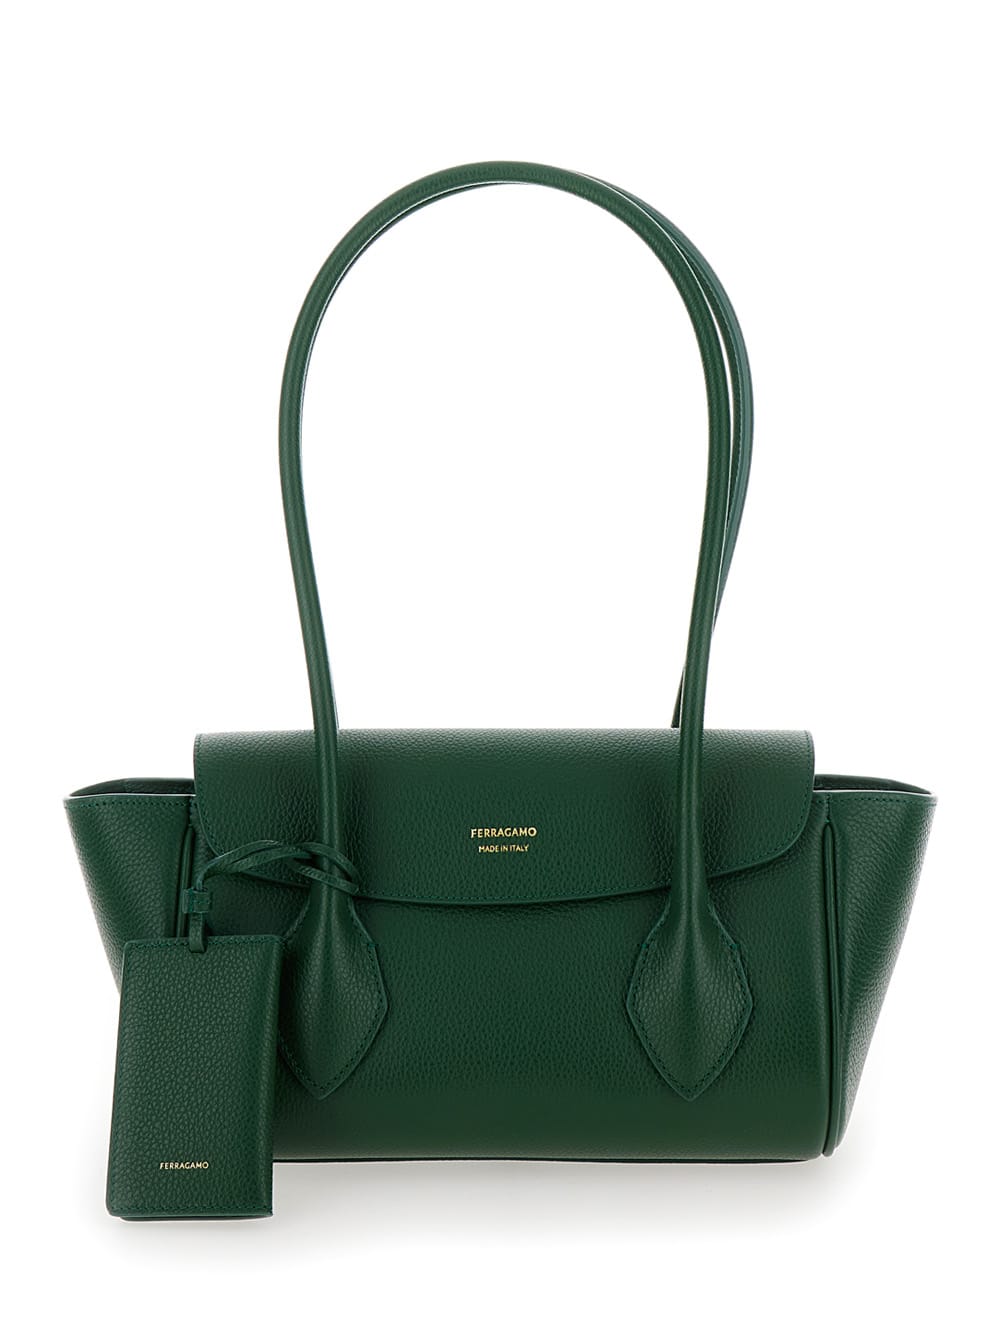 FERRAGAMO EAST-WEST S GREEN HANDBAG WITH LOGO DETAIL IN HAMMERED LEATHER WOMAN